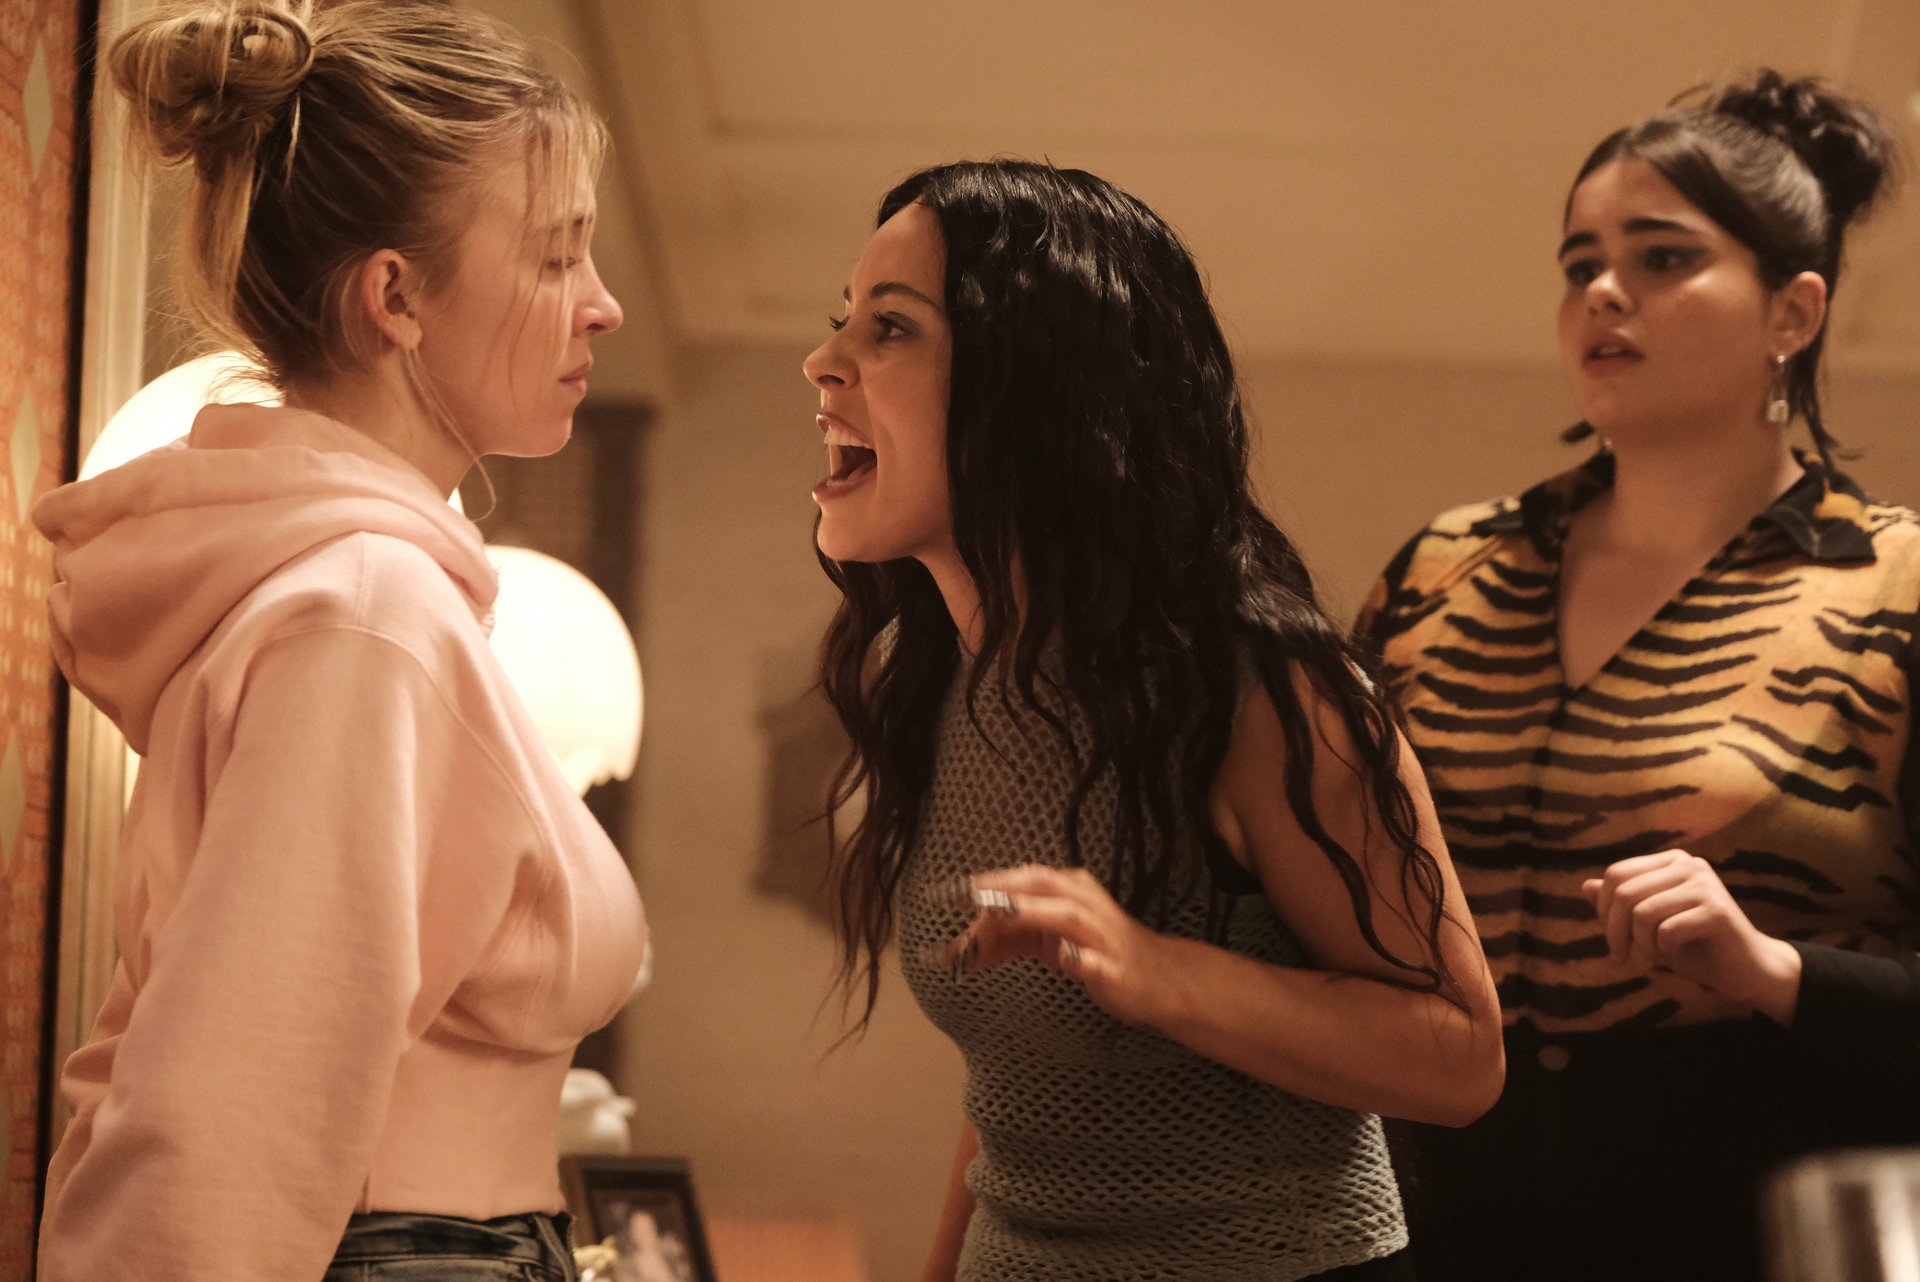 Cassie (Sydney Sweeney), Maddy (Alexa Demie), and Kat (Barbie Ferreira) in the 'Stand Still Like the Hummingbird' episode of 'Euphoria'